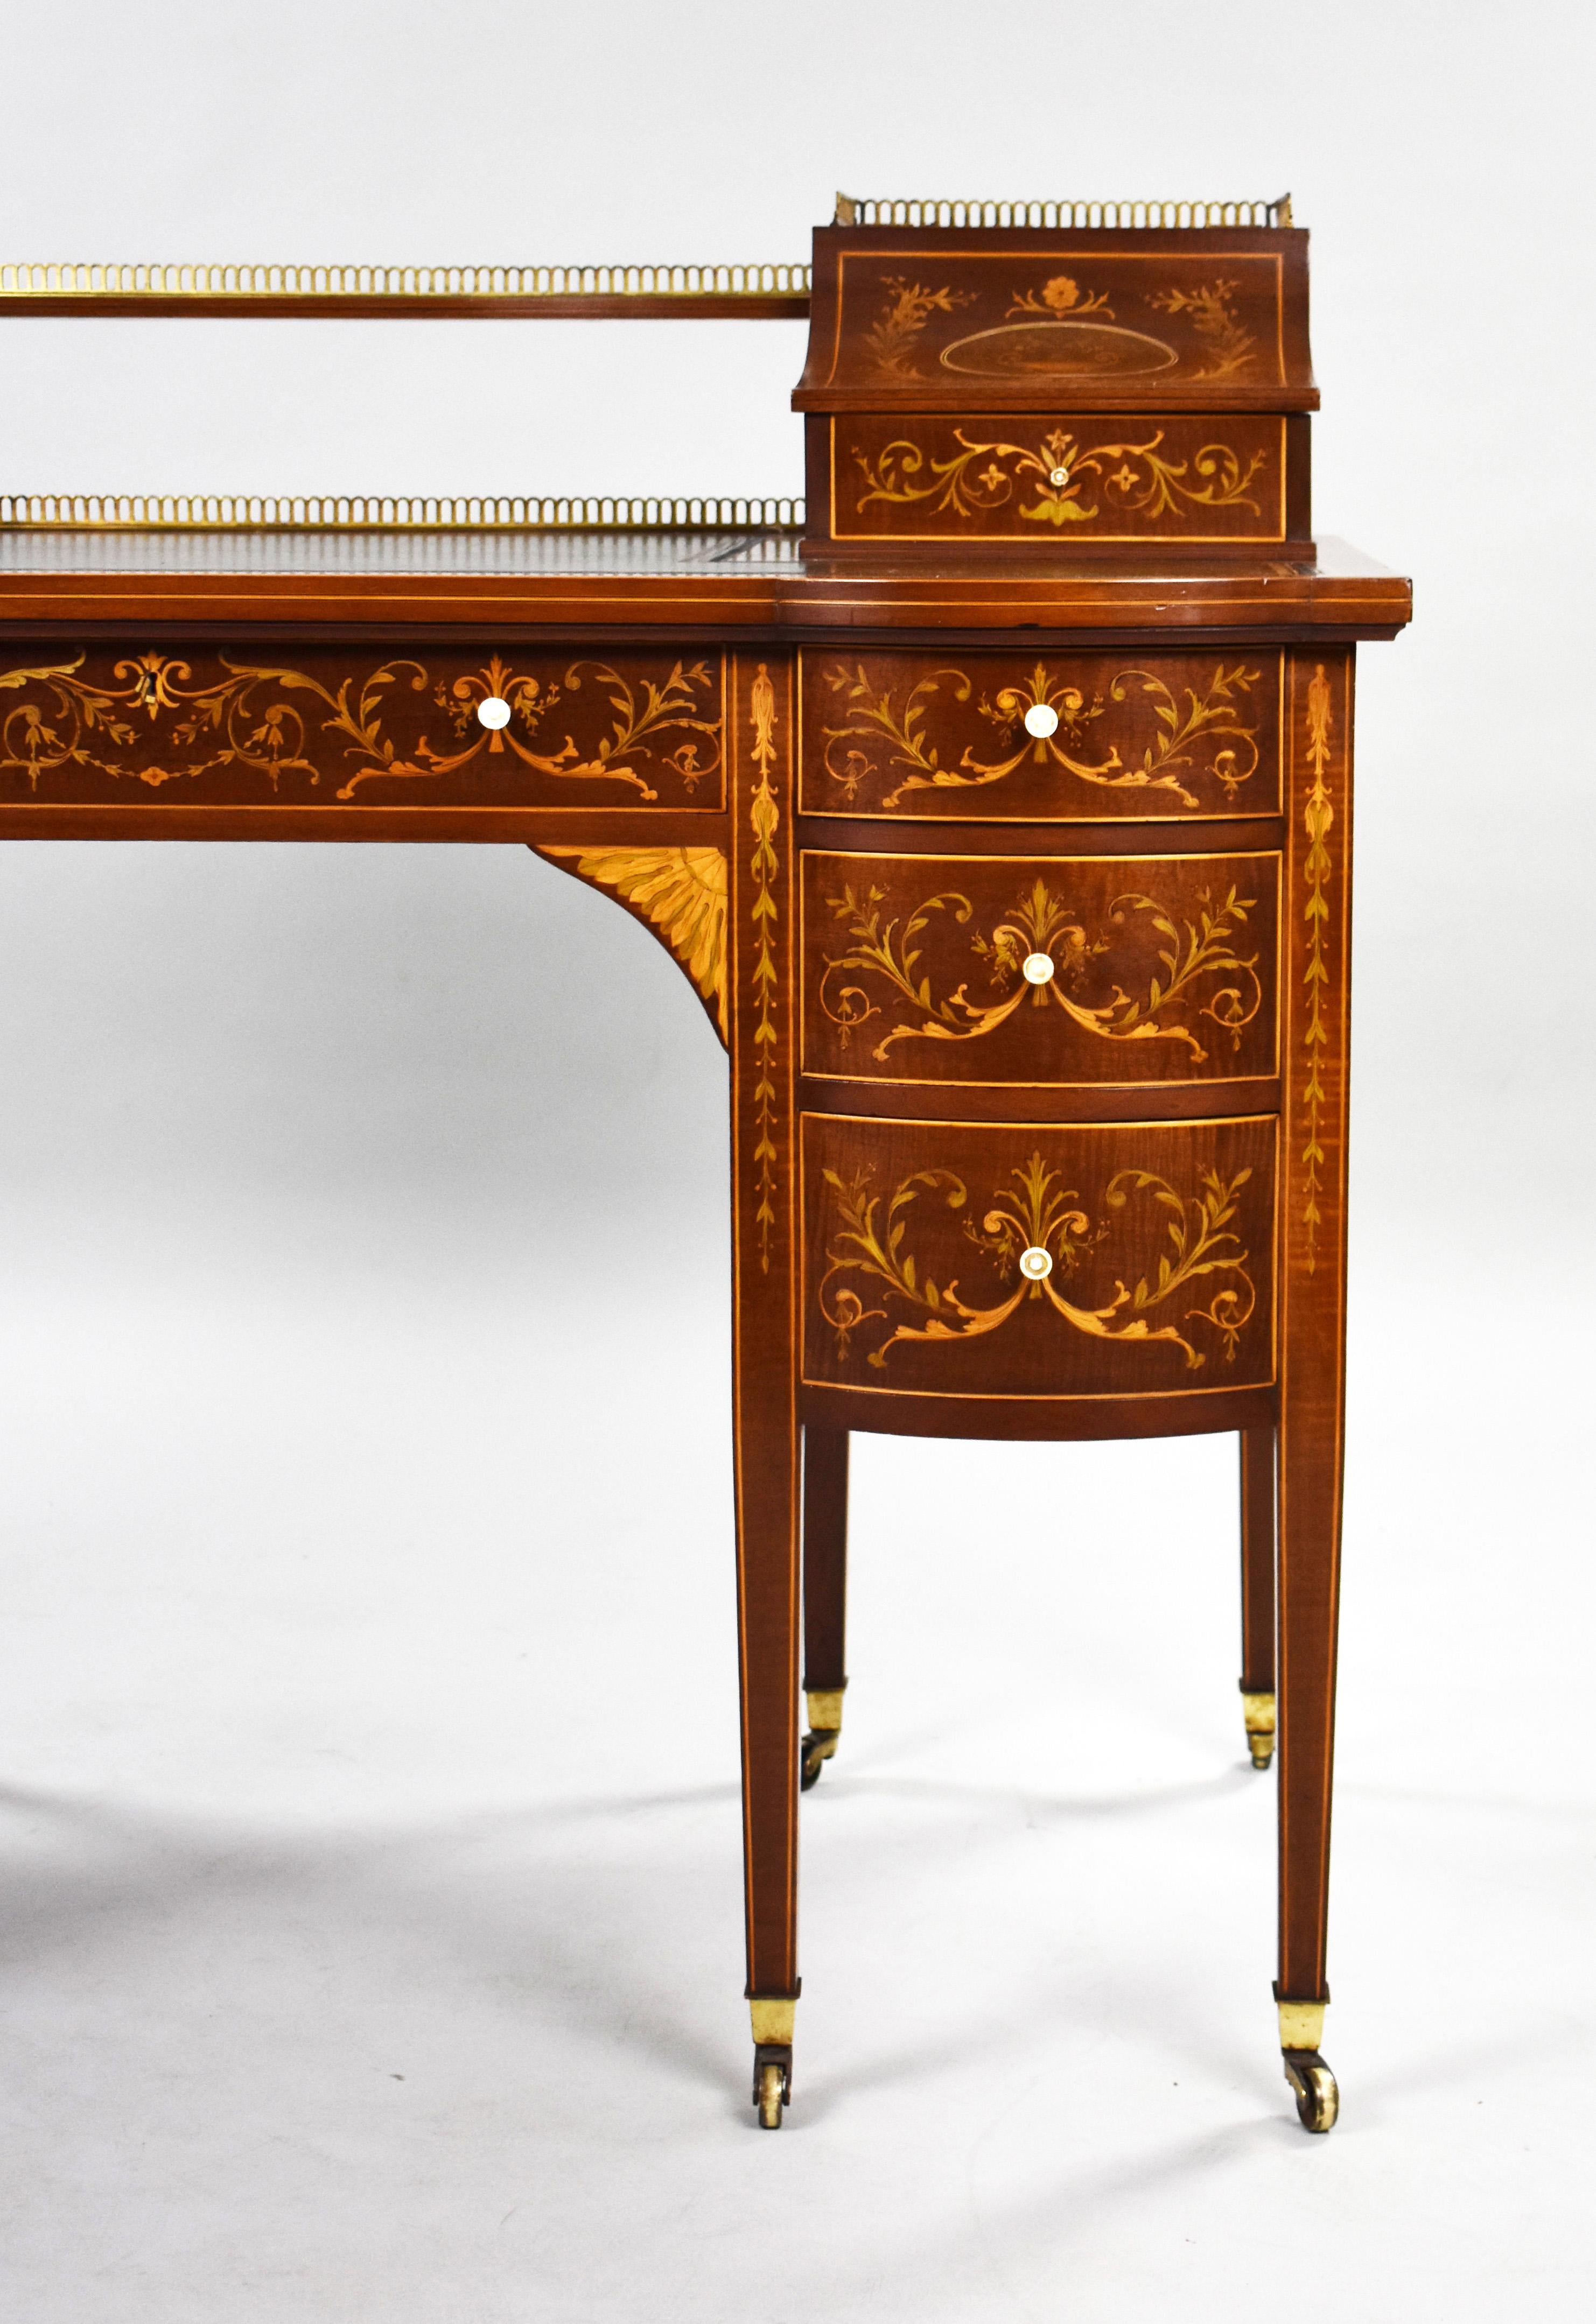 19th Century English Victorian Marquetry Inlaid Carlton House Desk For Sale 2